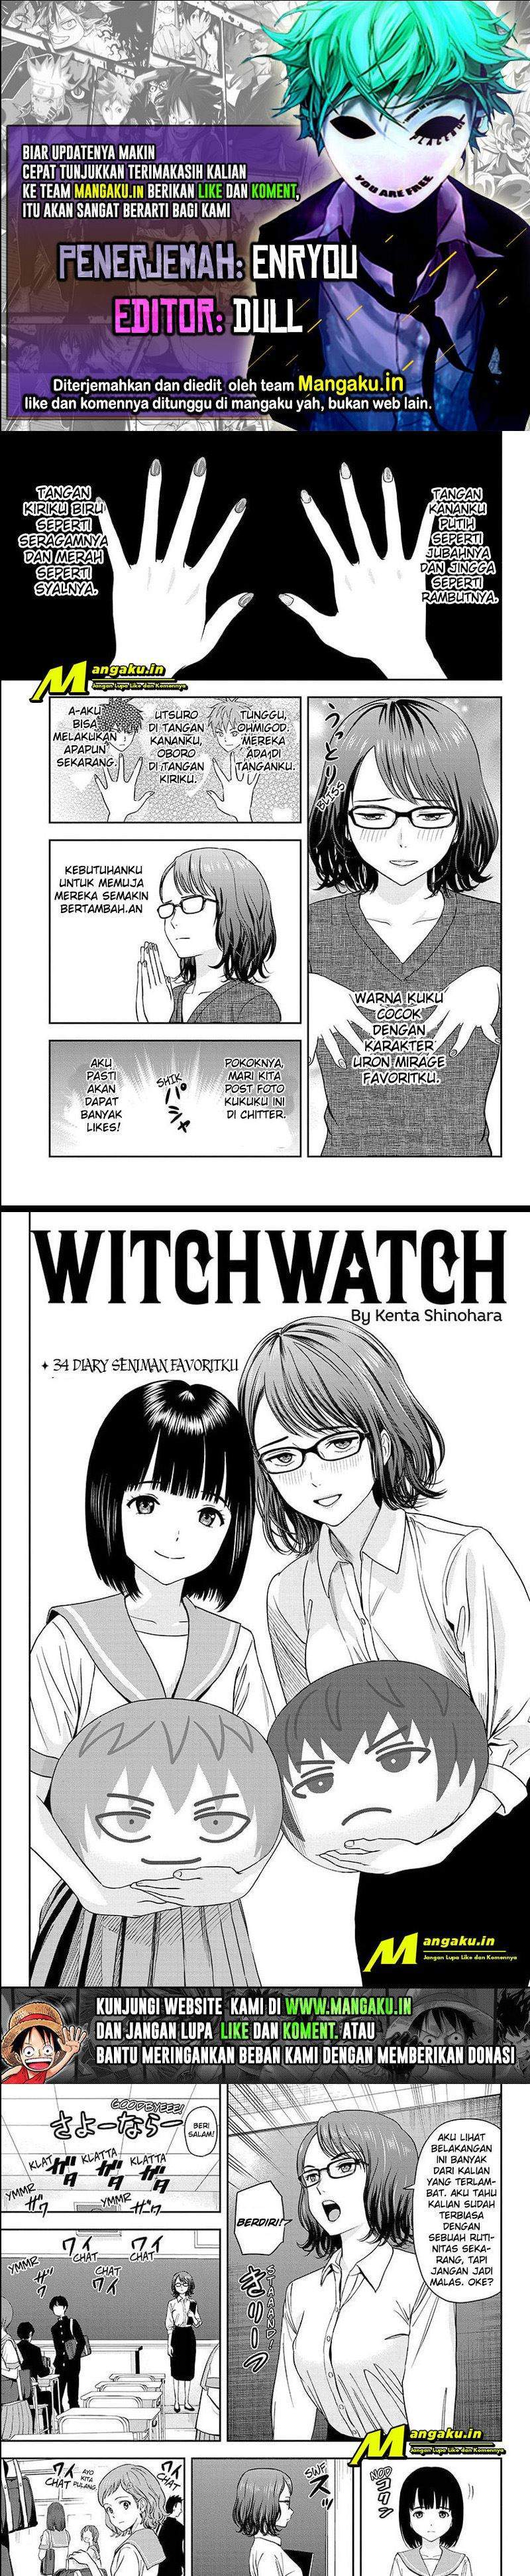 Witch Watch Chapter 34 1